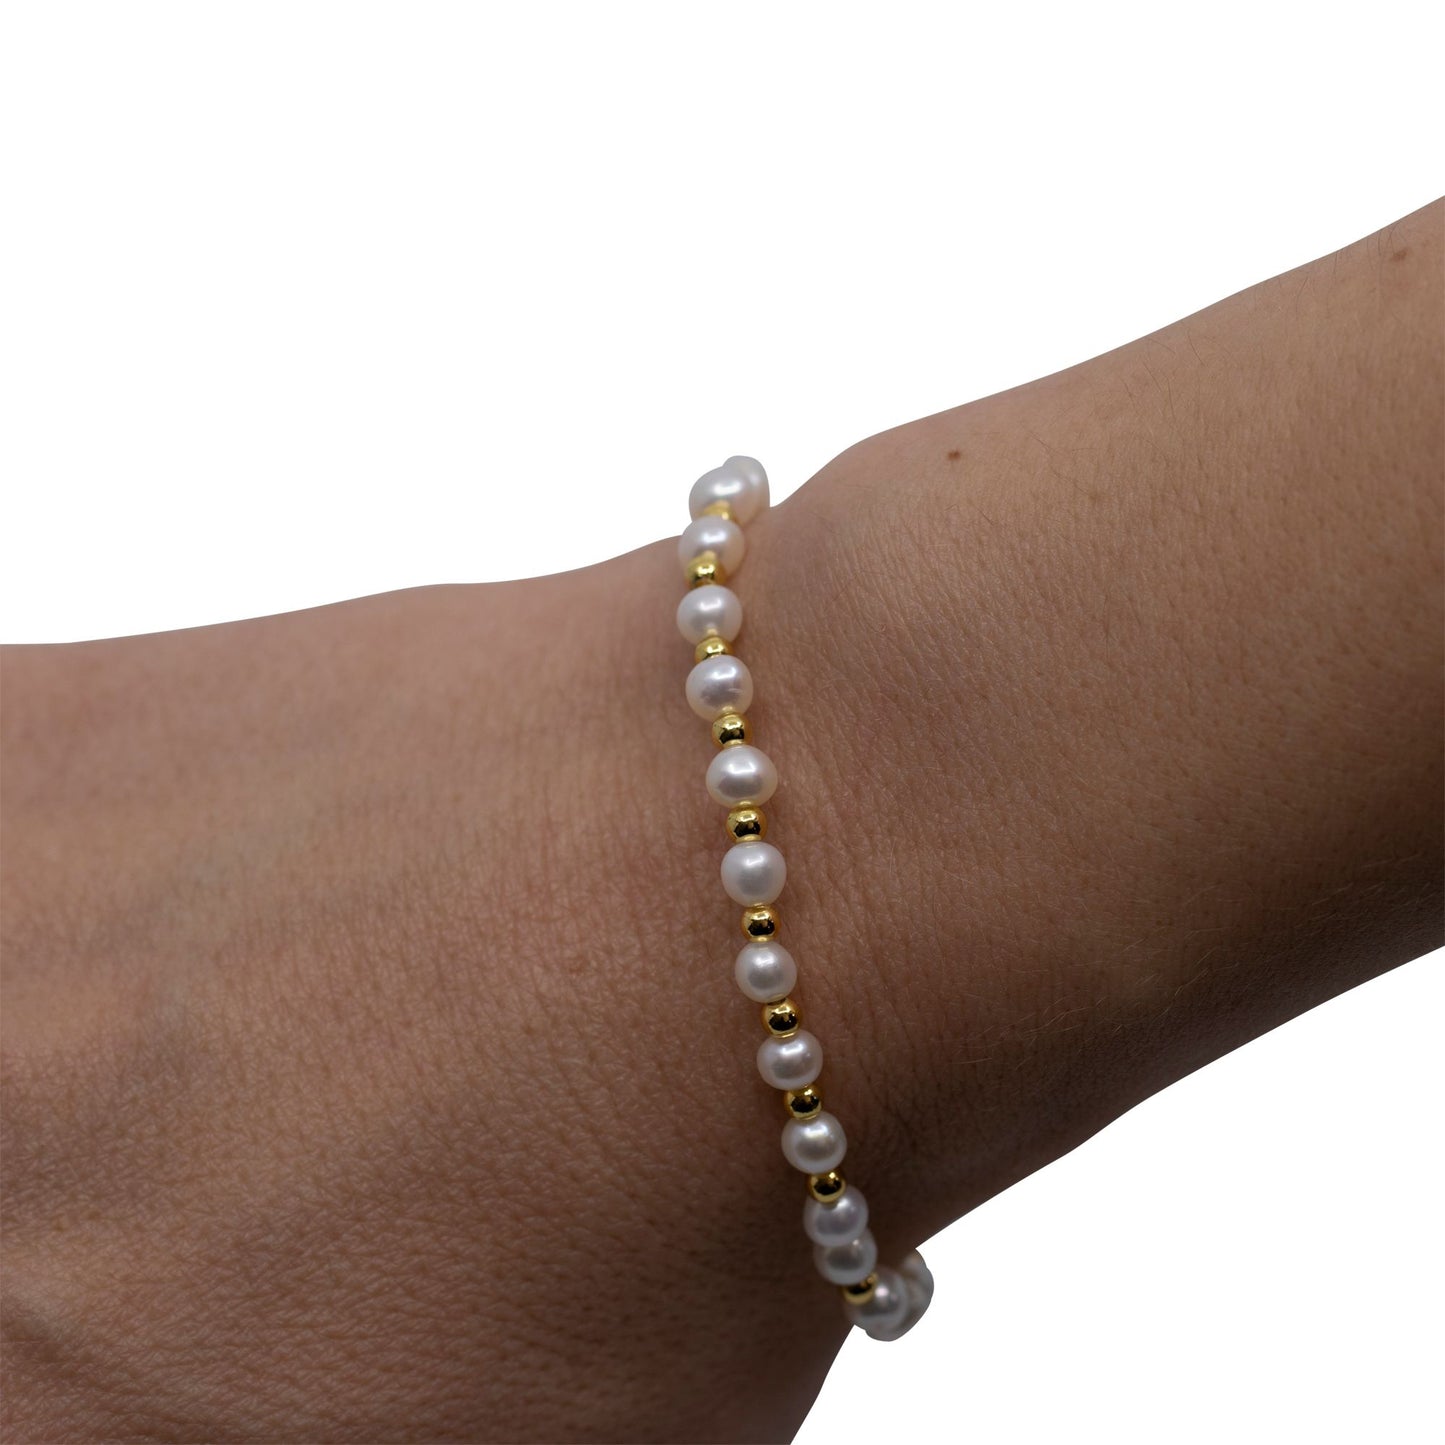 Flores - Gold-Tone Bead and Freshwater Pearl Stretch Bracelet